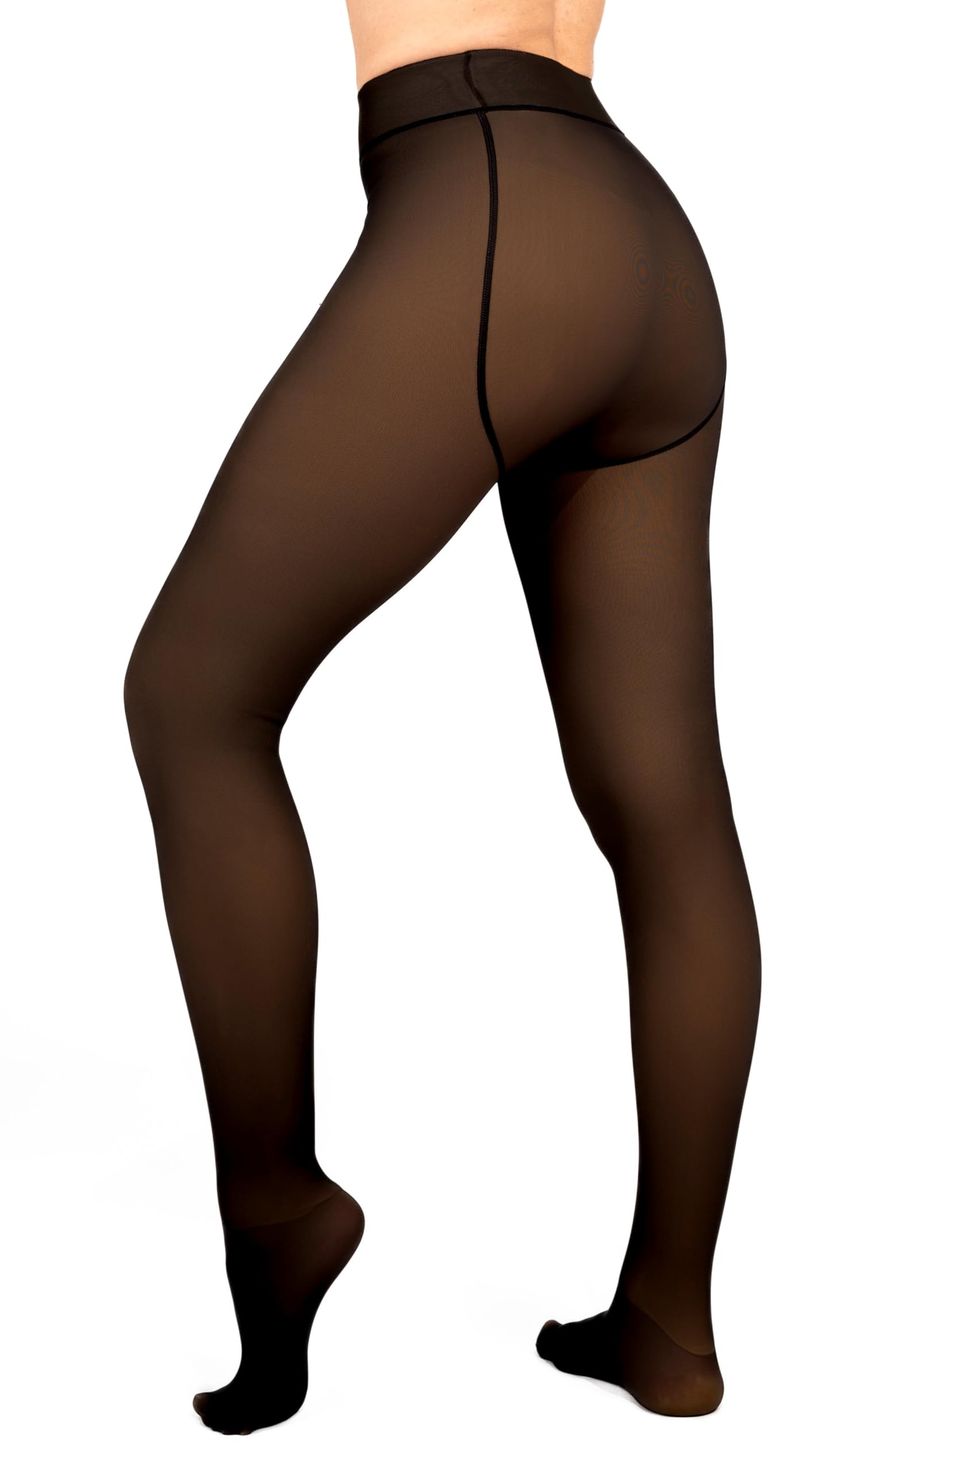 Fake Translucent Warm Pantyhose See Through Thermal Winter Tights Nude  Lined Translucent Leggings 